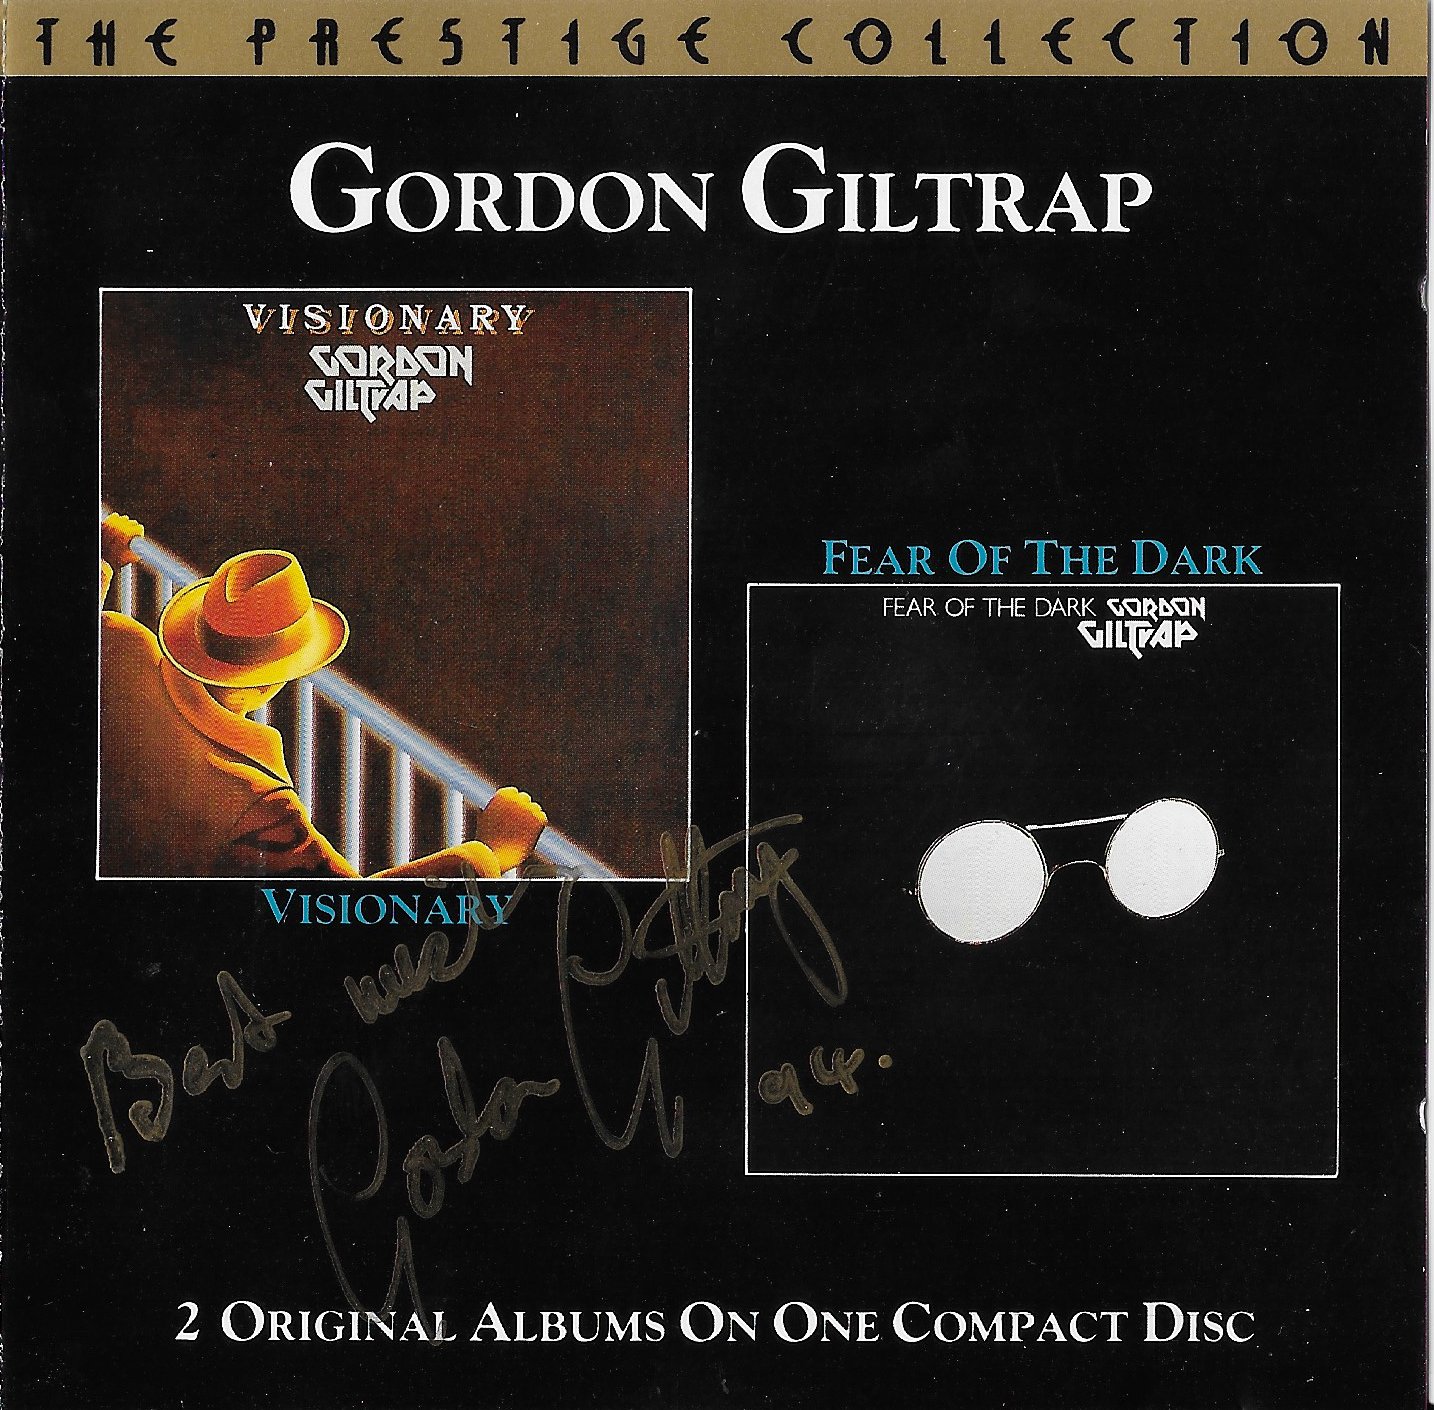 Picture of Visionary / Fear Of The Dark by artist Gordon Giltrap from the BBC cds - Records and Tapes library